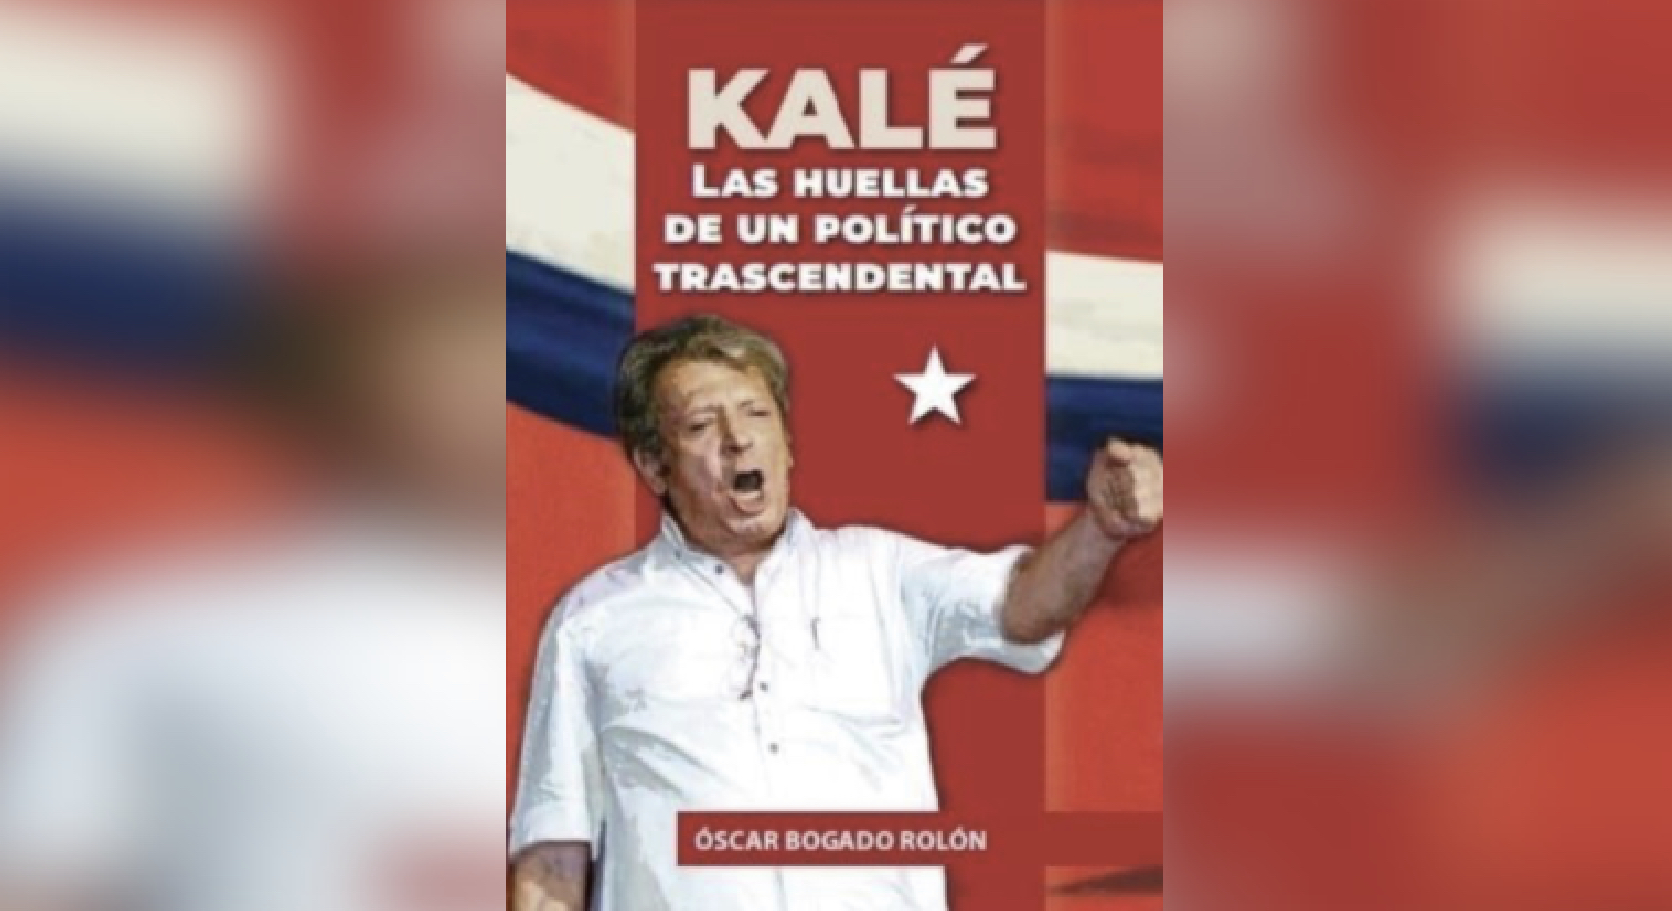 They will present a biographical book with the memories of Kale Galaverna